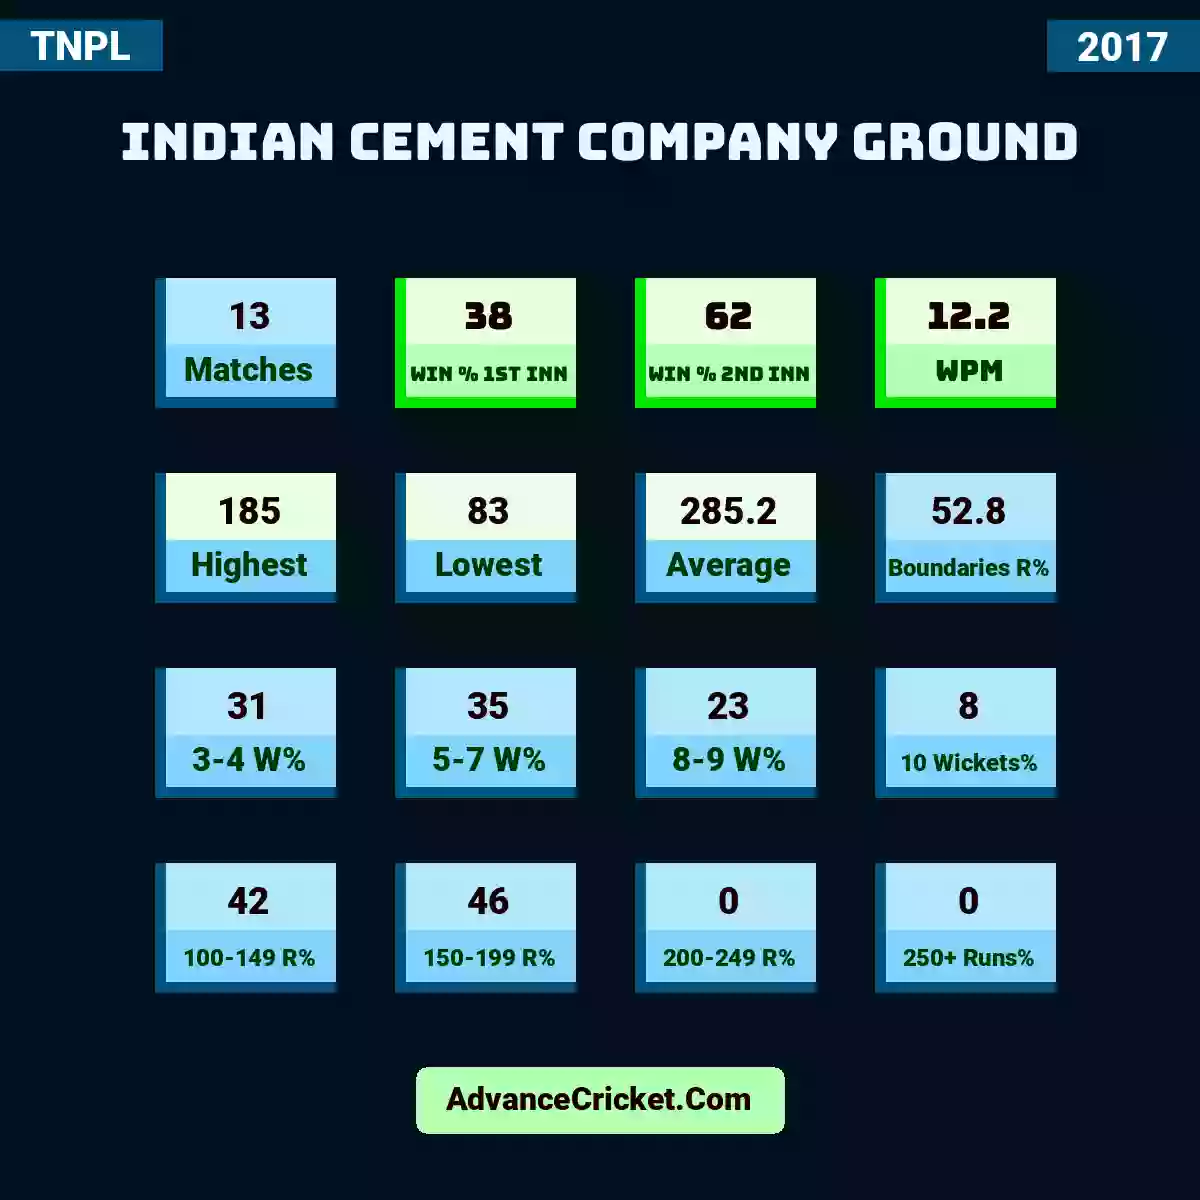 Image showing Indian Cement Company Ground with Matches: 13, Win % 1st Inn: 38, Win % 2nd Inn: 62, WPM: 12.2, Highest: 185, Lowest: 83, Average: 285.2, Boundaries R%: 52.8, 3-4 W%: 31, 5-7 W%: 35, 8-9 W%: 23, 10 Wickets%: 8, 100-149 R%: 42, 150-199 R%: 46, 200-249 R%: 0, 250+ Runs%: 0.